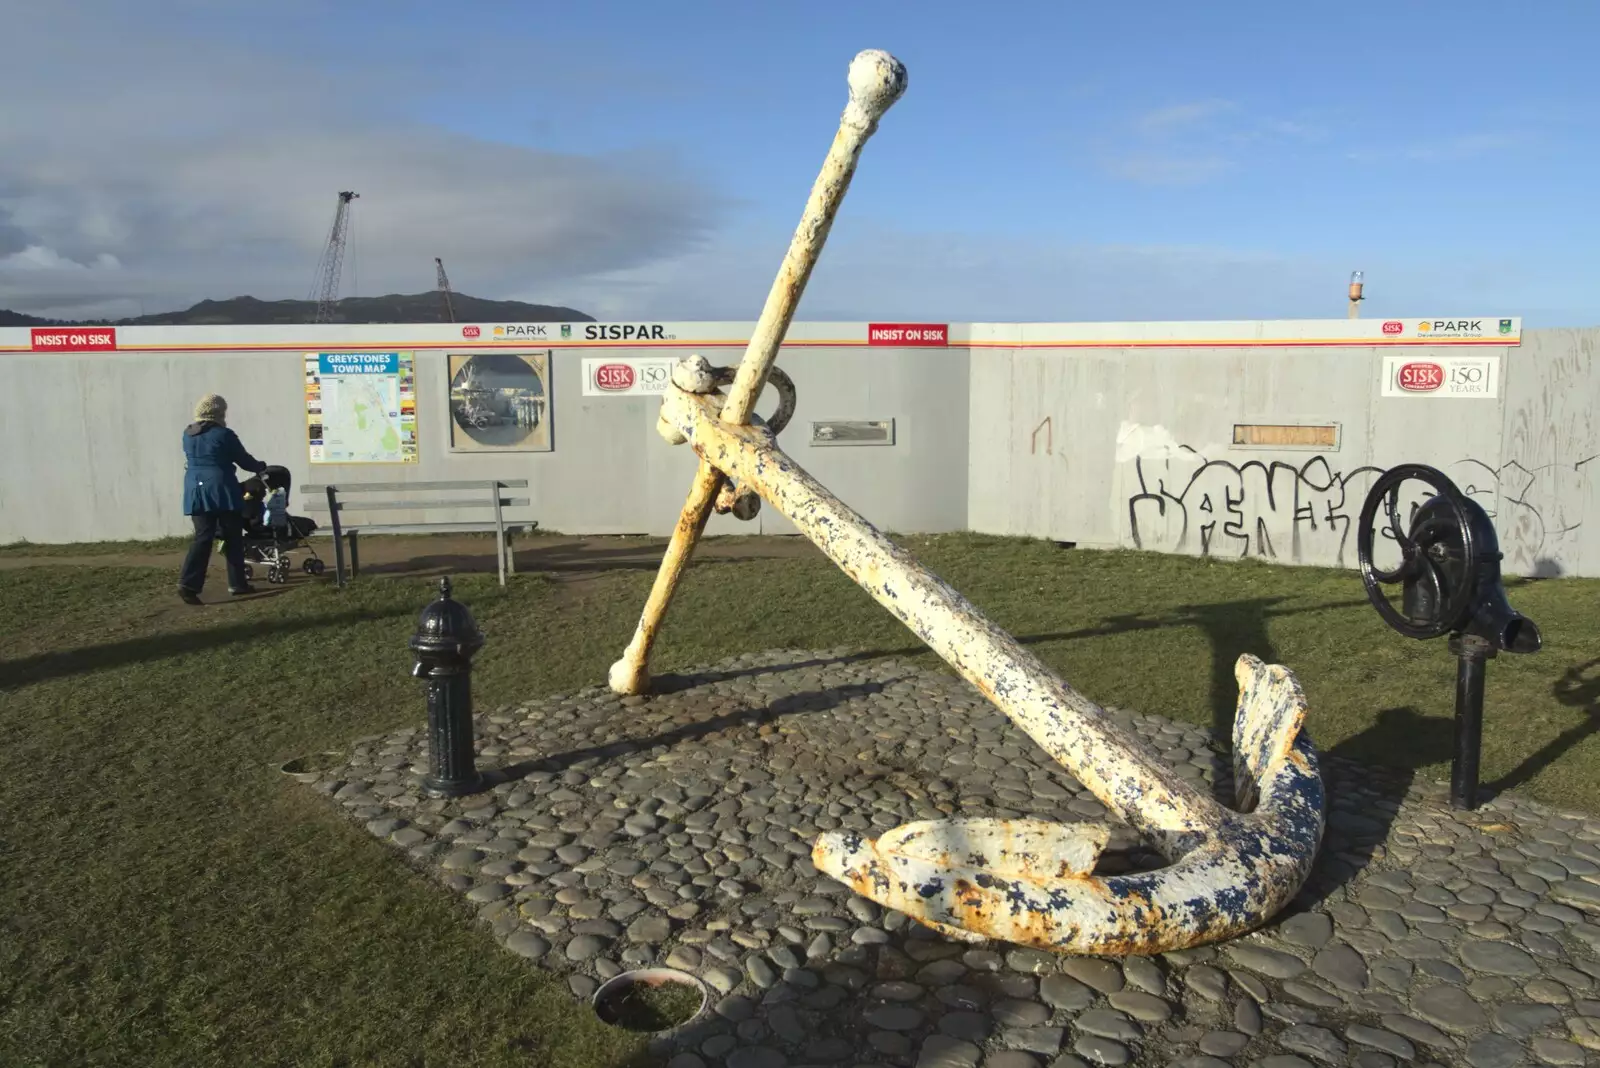 An anchor, surrounded by hoardings, from A Day in Greystones, County Dublin, Ireland - 28th February 2010